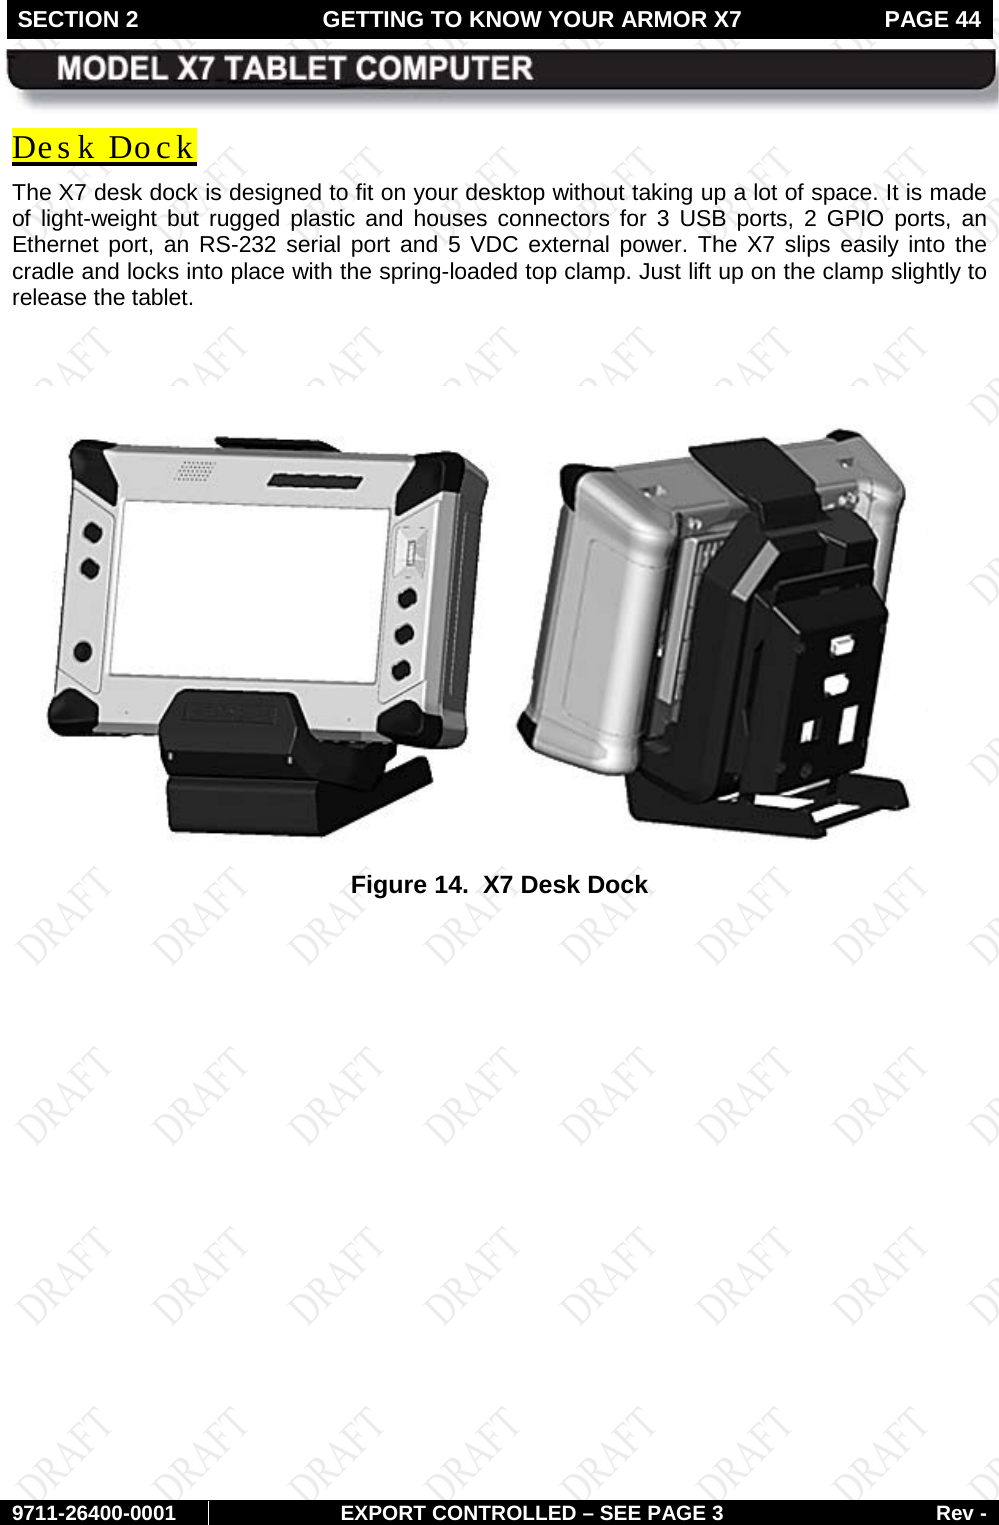 SECTION 2 GETTING TO KNOW YOUR ARMOR X7  PAGE 44        9711-26400-0001 EXPORT CONTROLLED – SEE PAGE 3 Rev - Des k Dock The X7 desk dock is designed to fit on your desktop without taking up a lot of space. It is made of light-weight but rugged plastic and houses connectors for 3 USB ports, 2 GPIO ports, an Ethernet port, an RS-232 serial port and 5 VDC external power. The X7 slips easily into the cradle and locks into place with the spring-loaded top clamp. Just lift up on the clamp slightly to release the tablet.   Figure 14.  X7 Desk Dock    